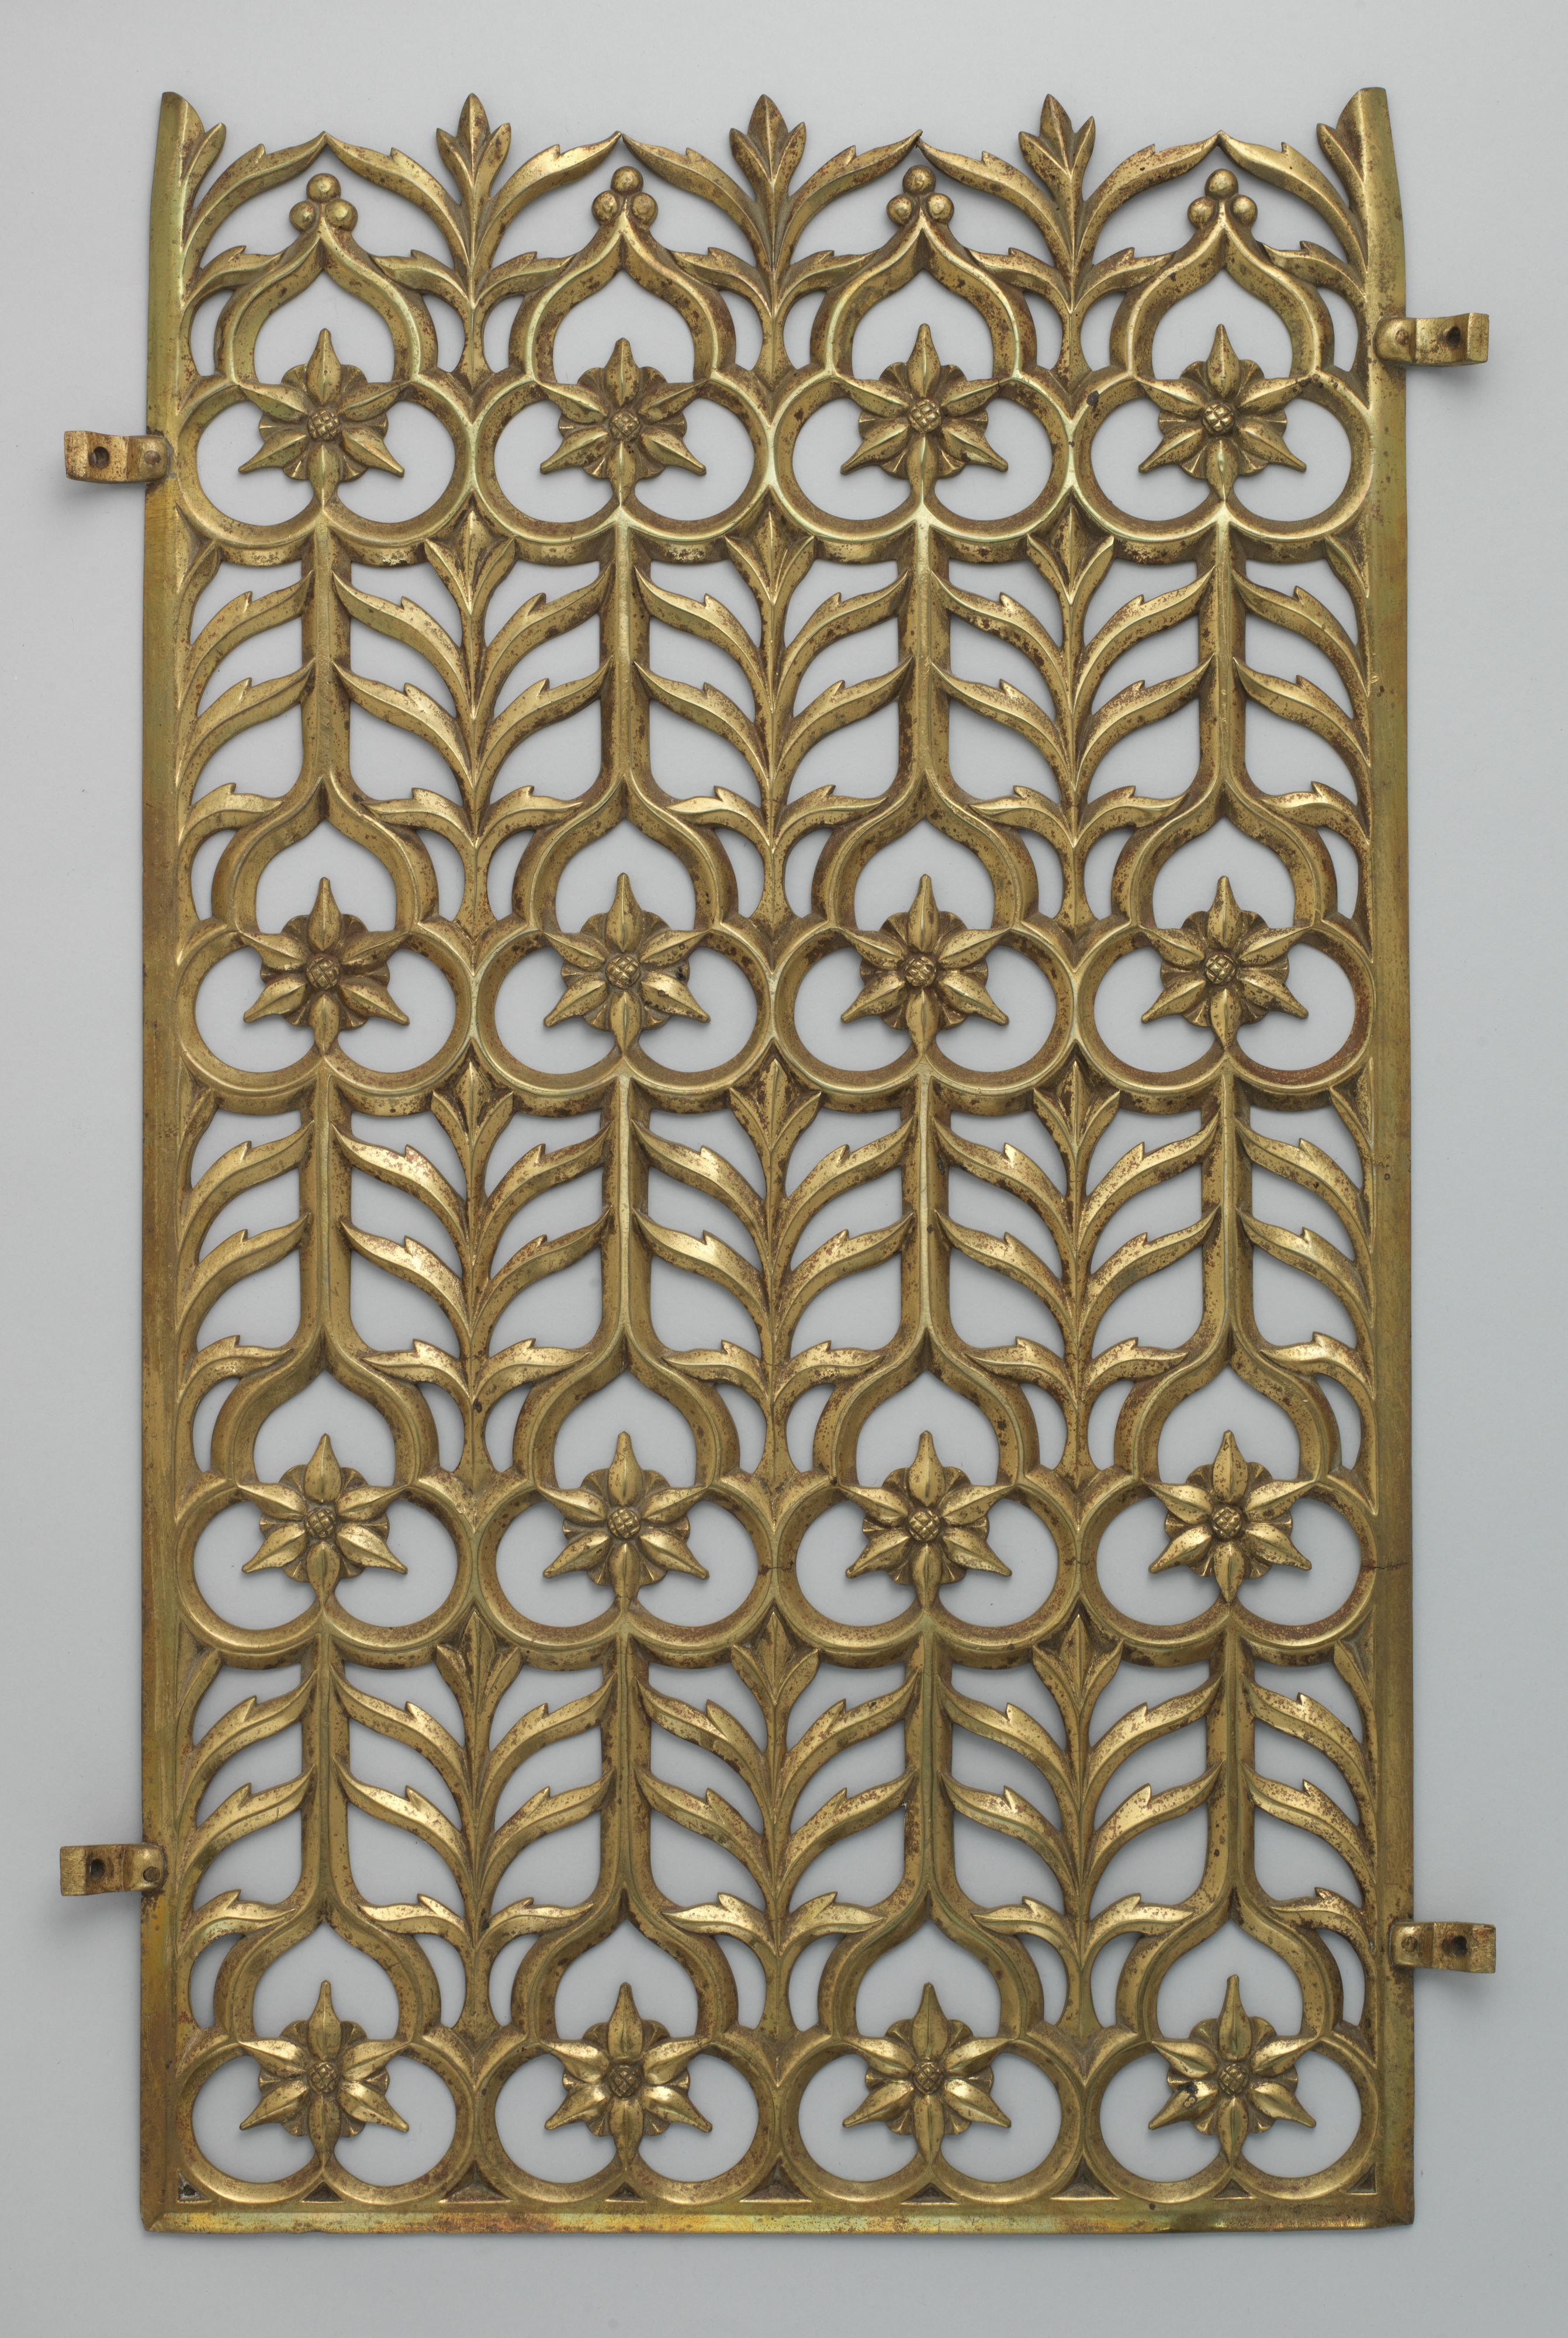 Augustus Welby Northmore Pugin  Decorative grill from the Palace